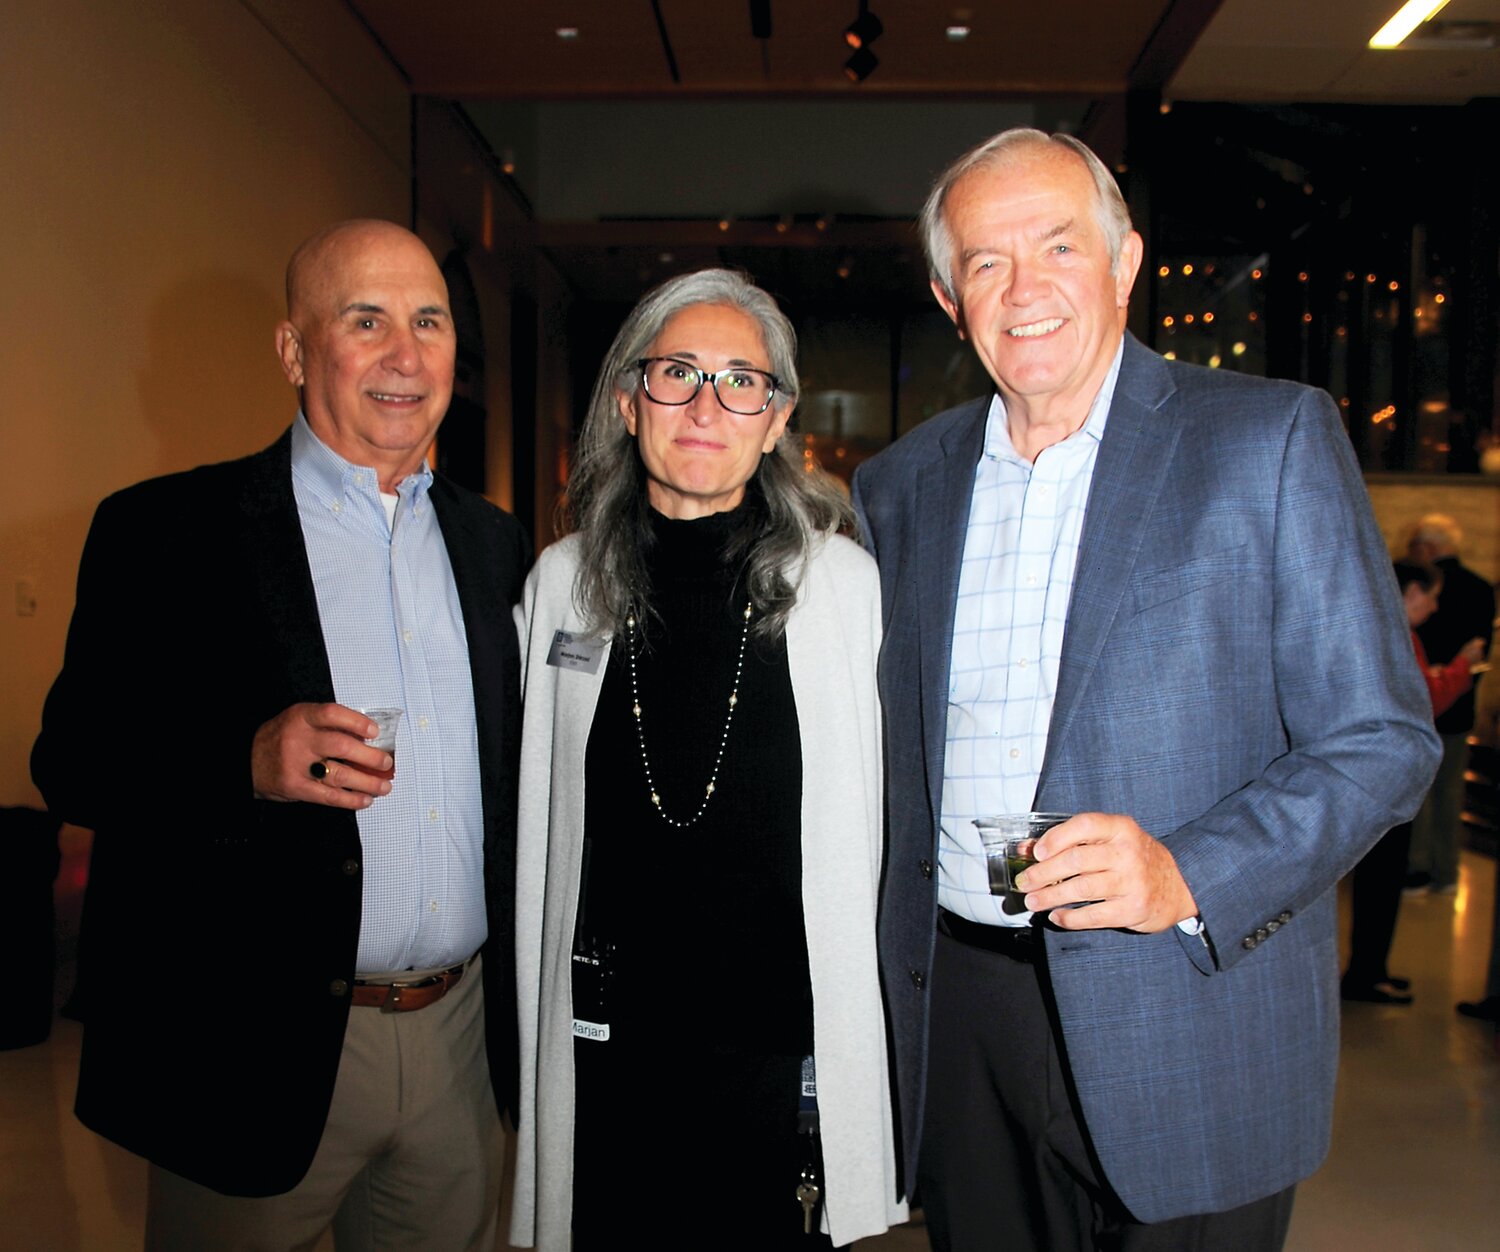 Fred Cresson, Marjan Shirzad and Ron Strouse, former mayor of Doylestown.